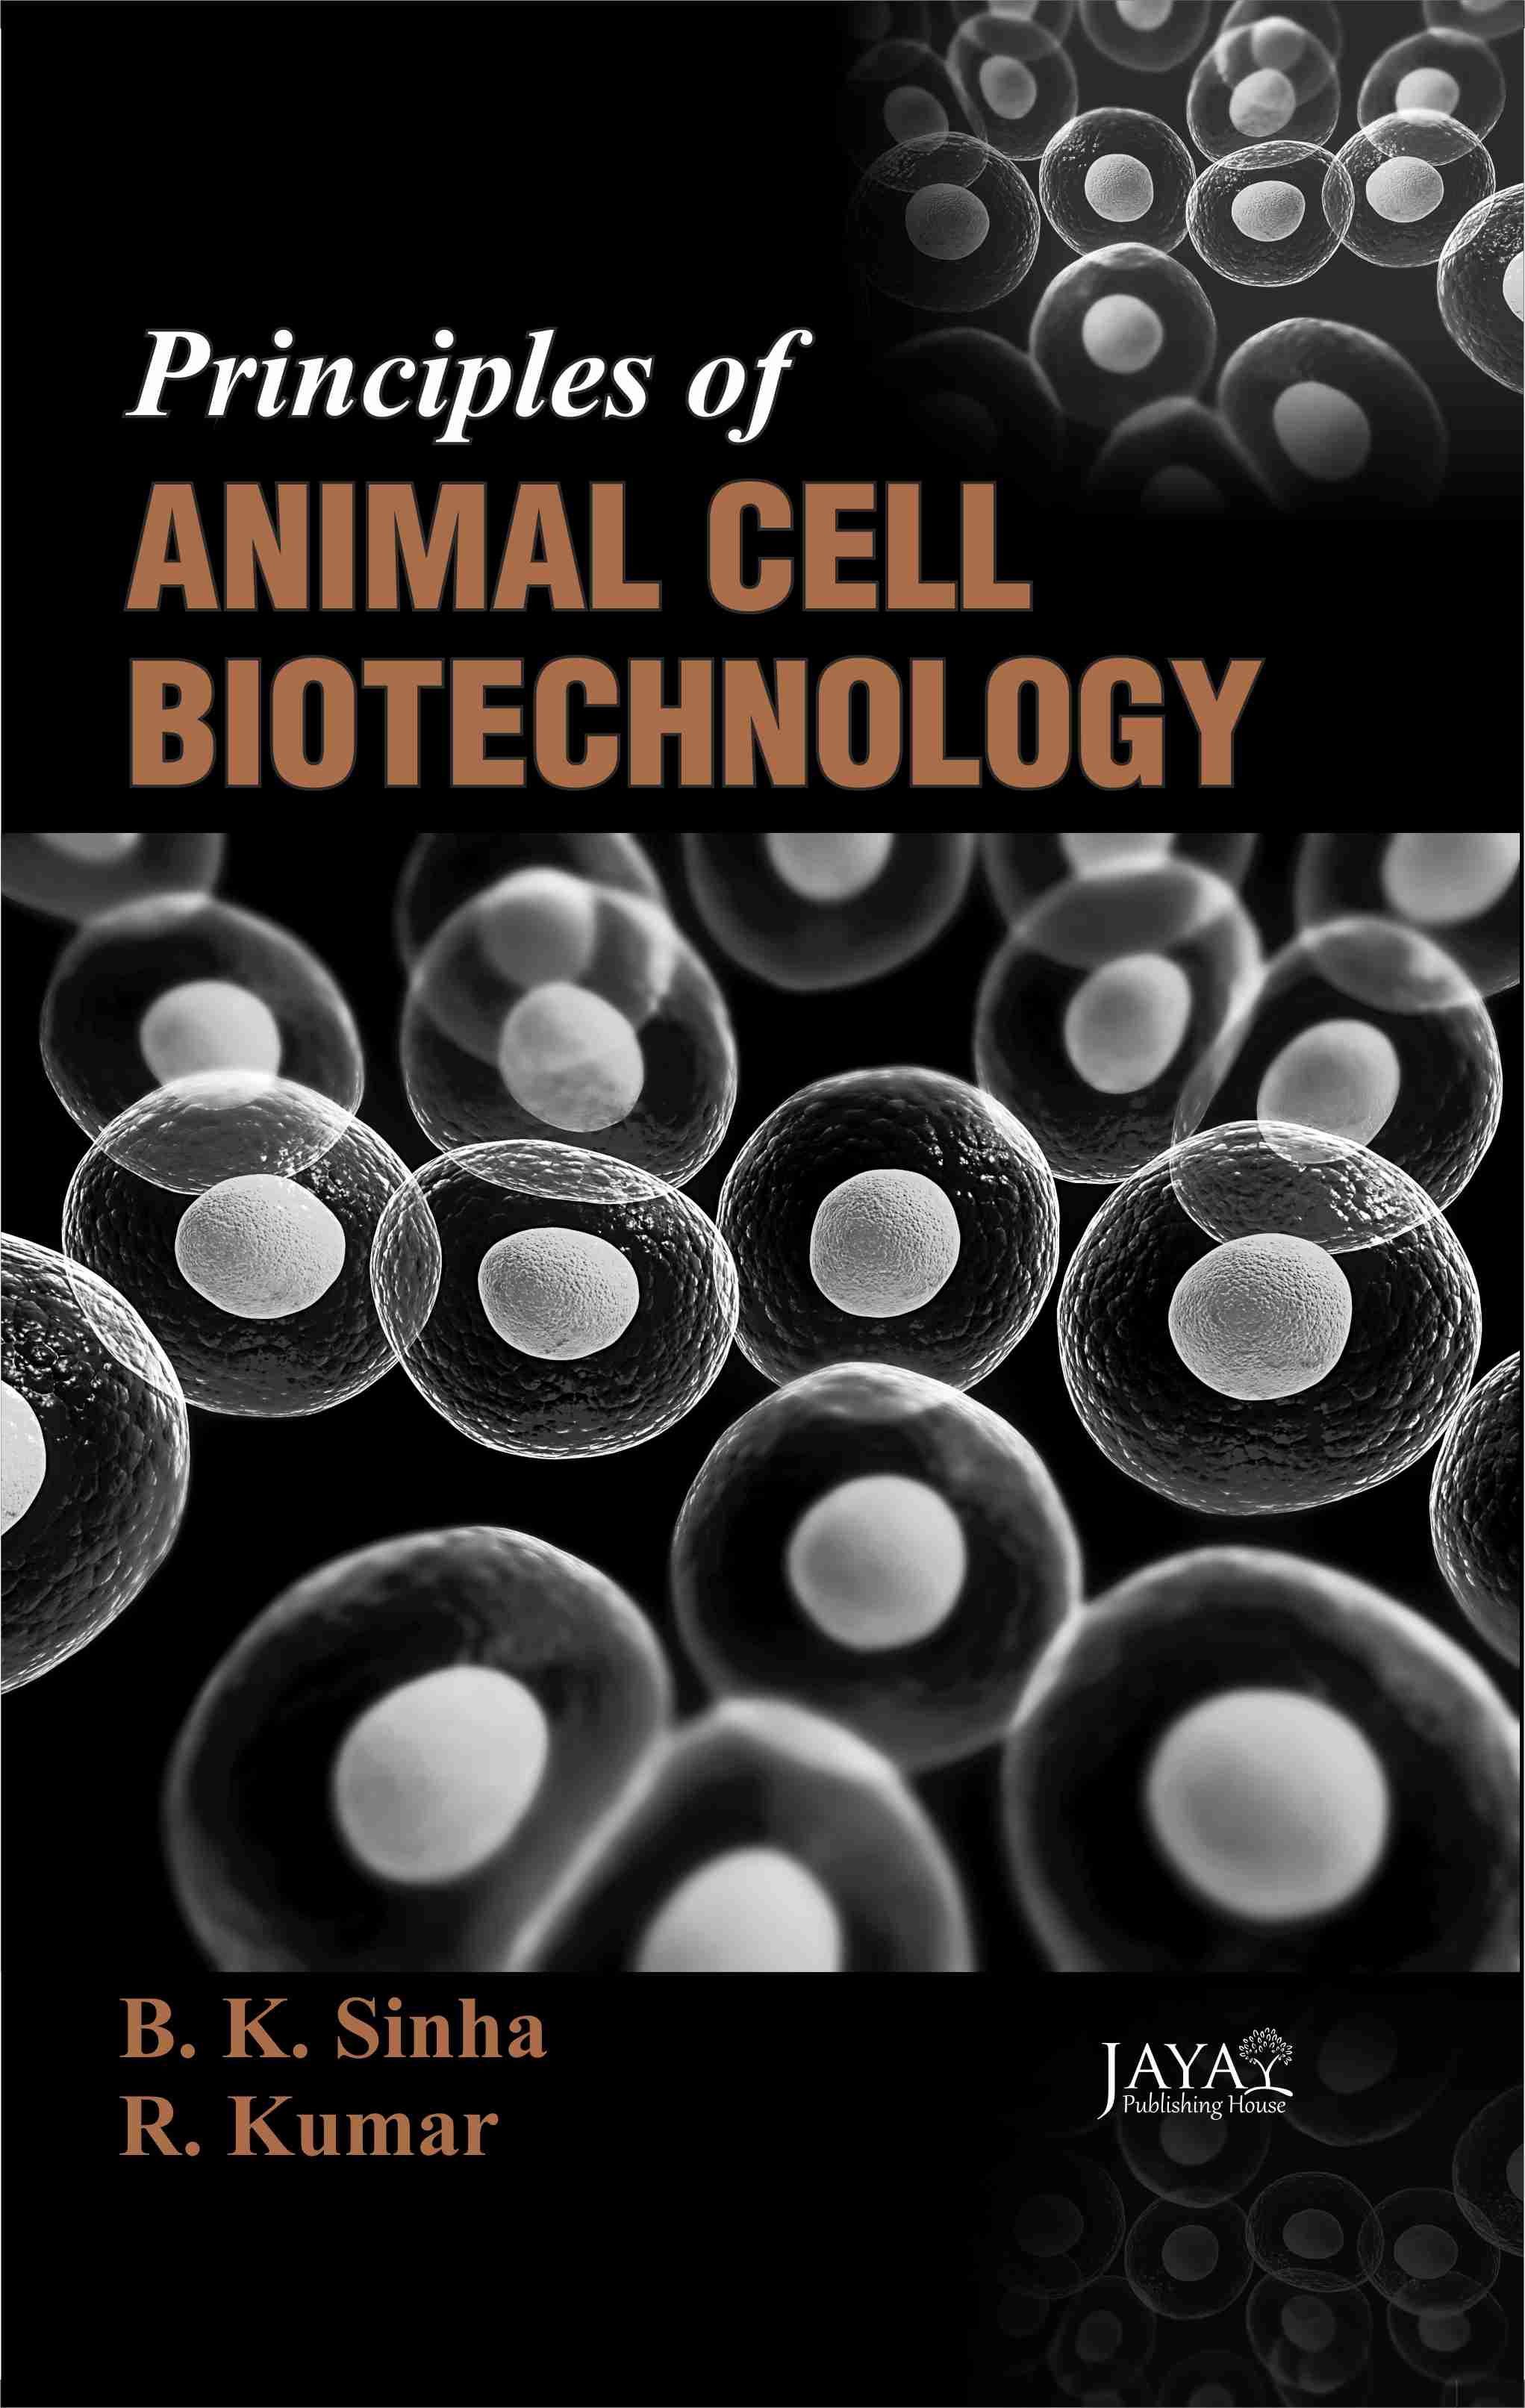 Principles of Animal Cell Biotechnology